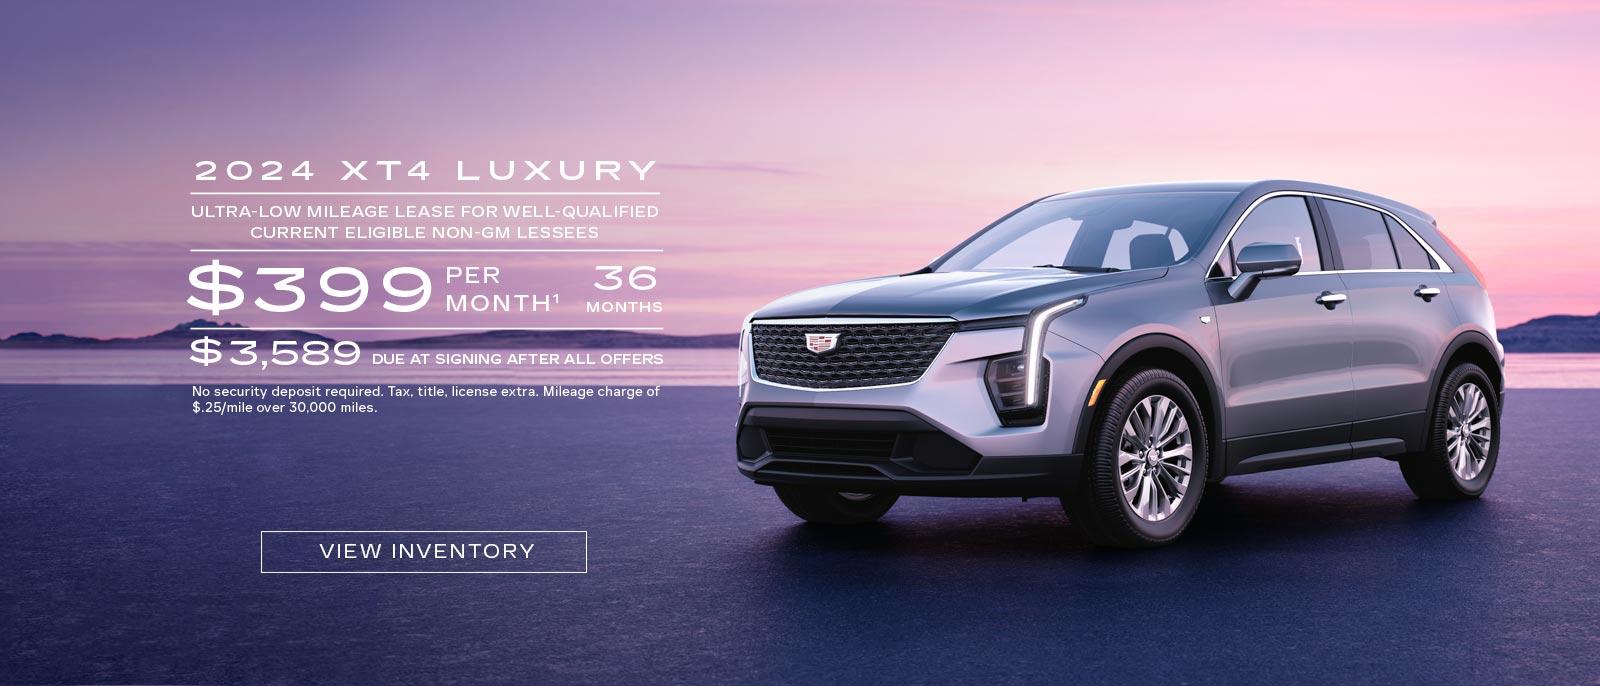 2024 XT4 Luxury. Ultra-low mileage lease for well-qualified current eligible Non-GM Lessees. $399 per month. 36 months. $3,589 due at signing after all offers.